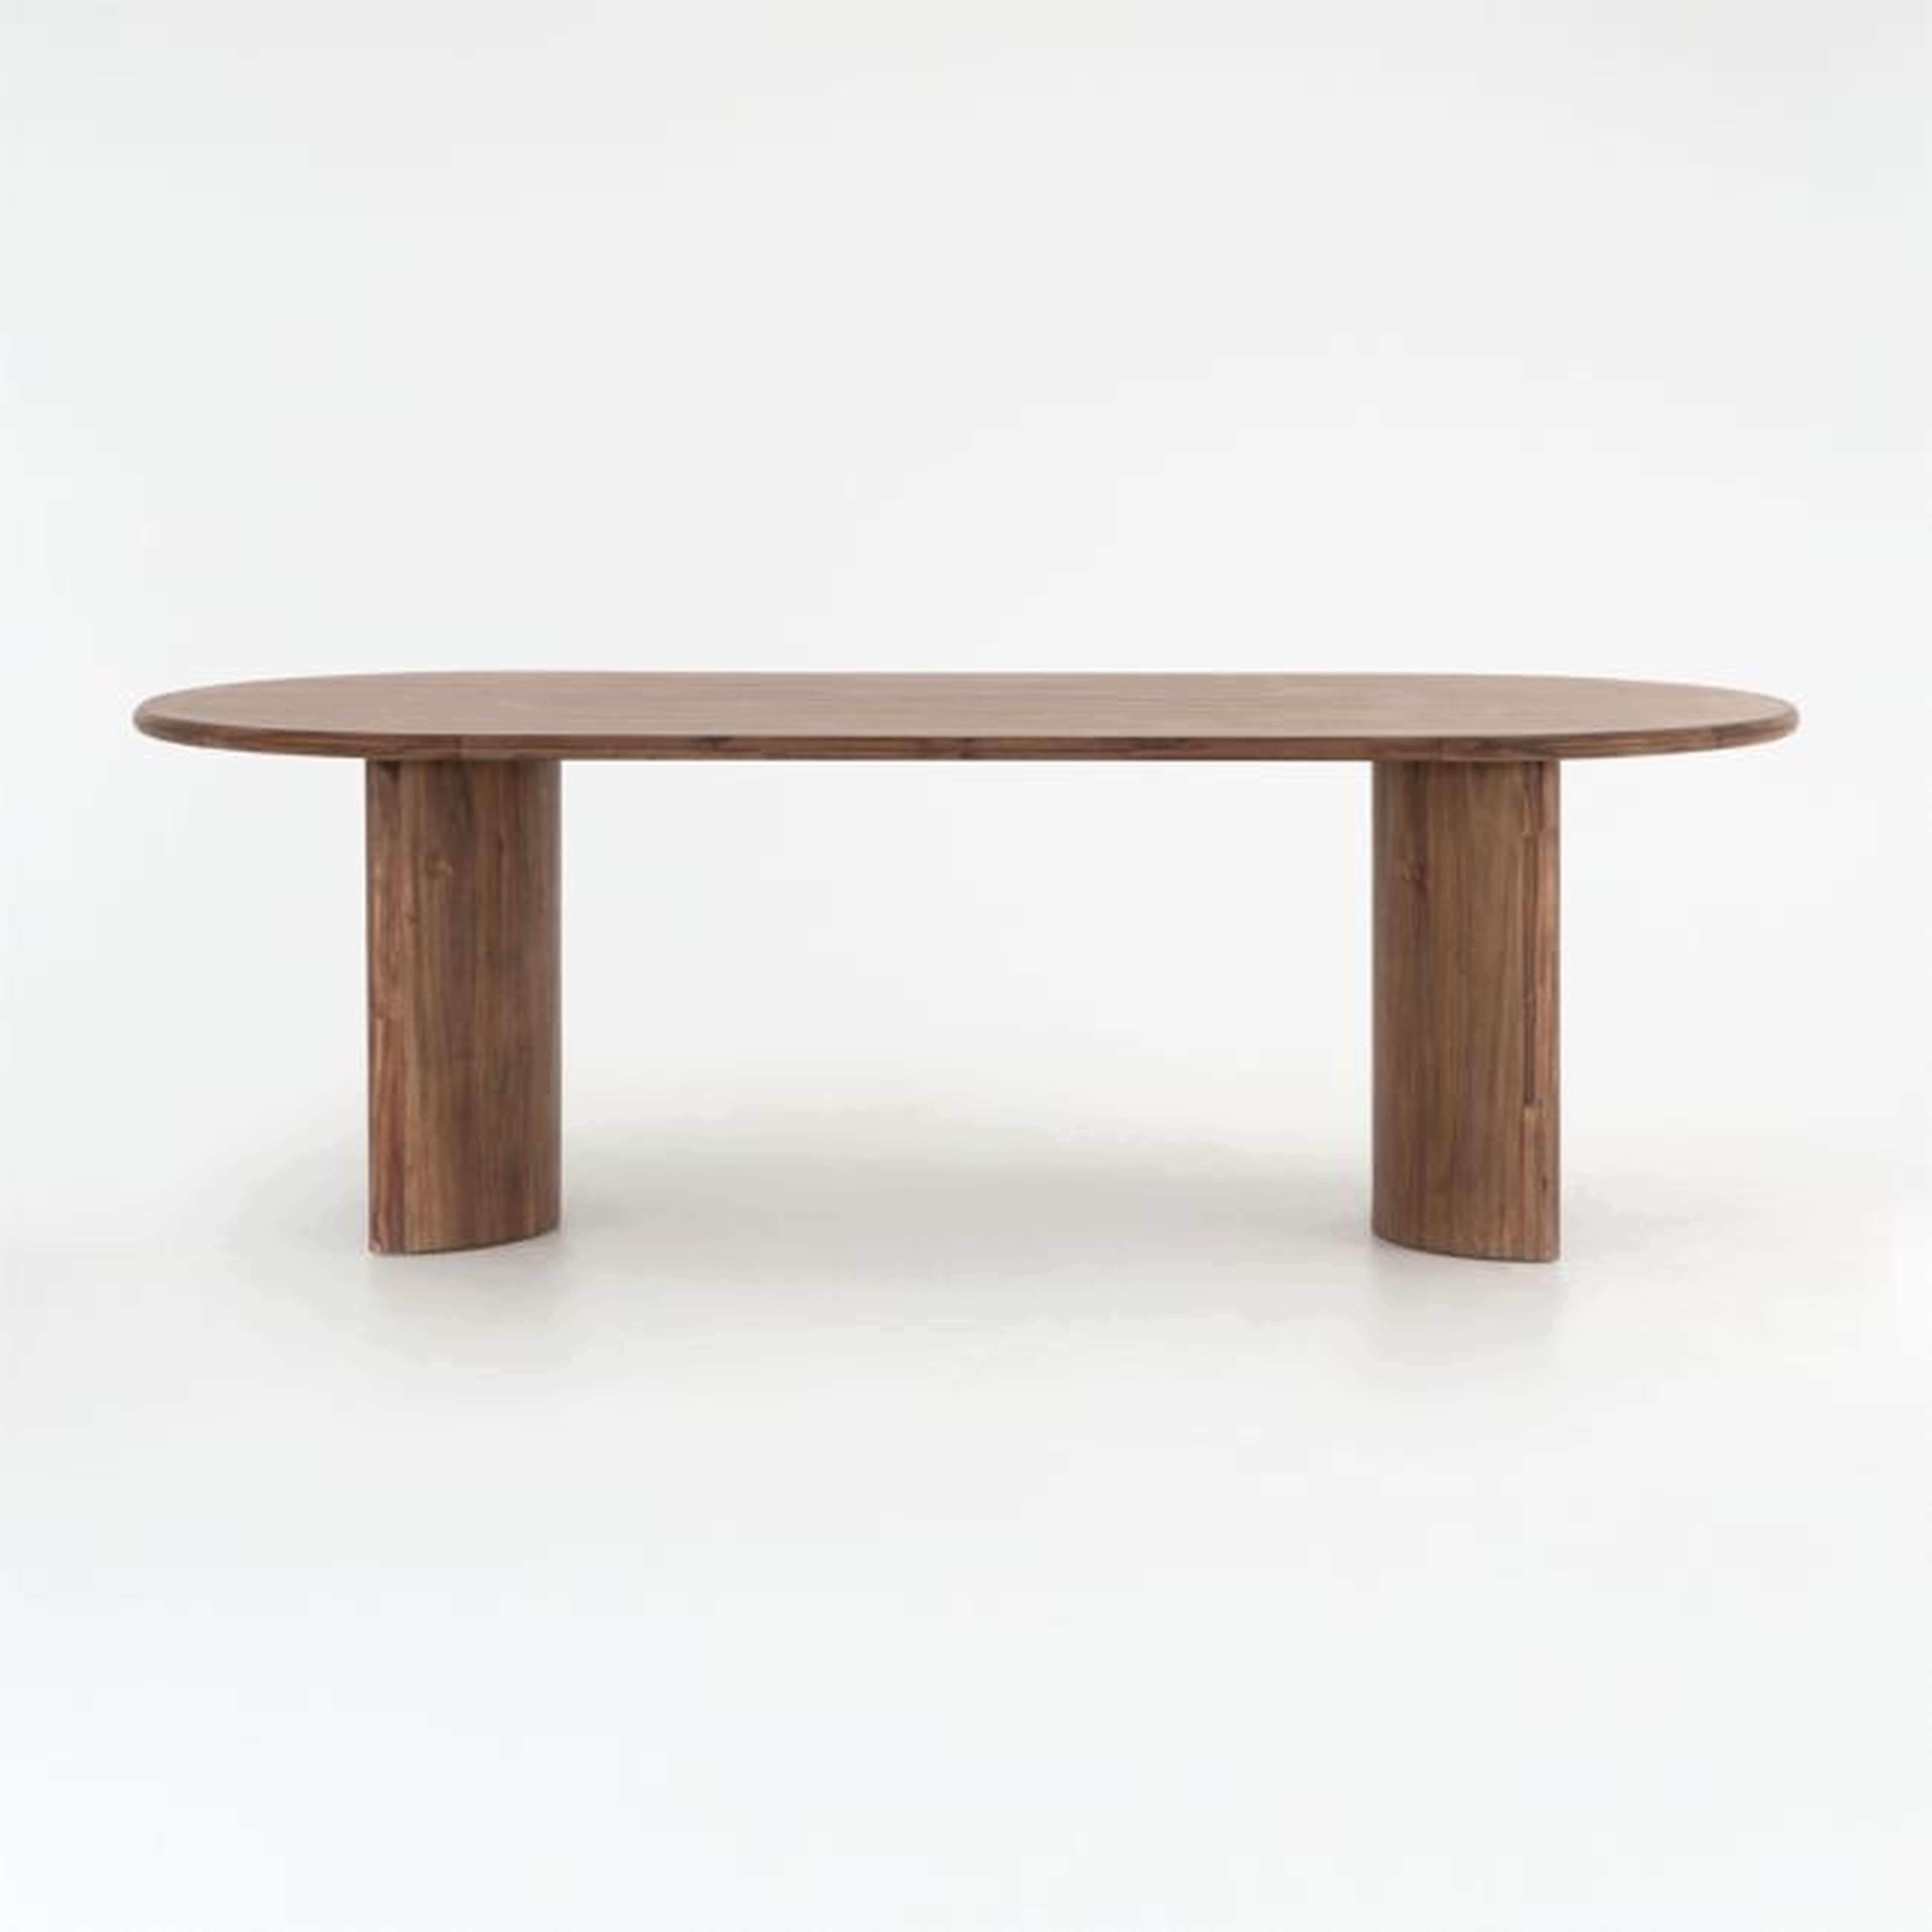 Panos 94" Dining Table. - Crate and Barrel